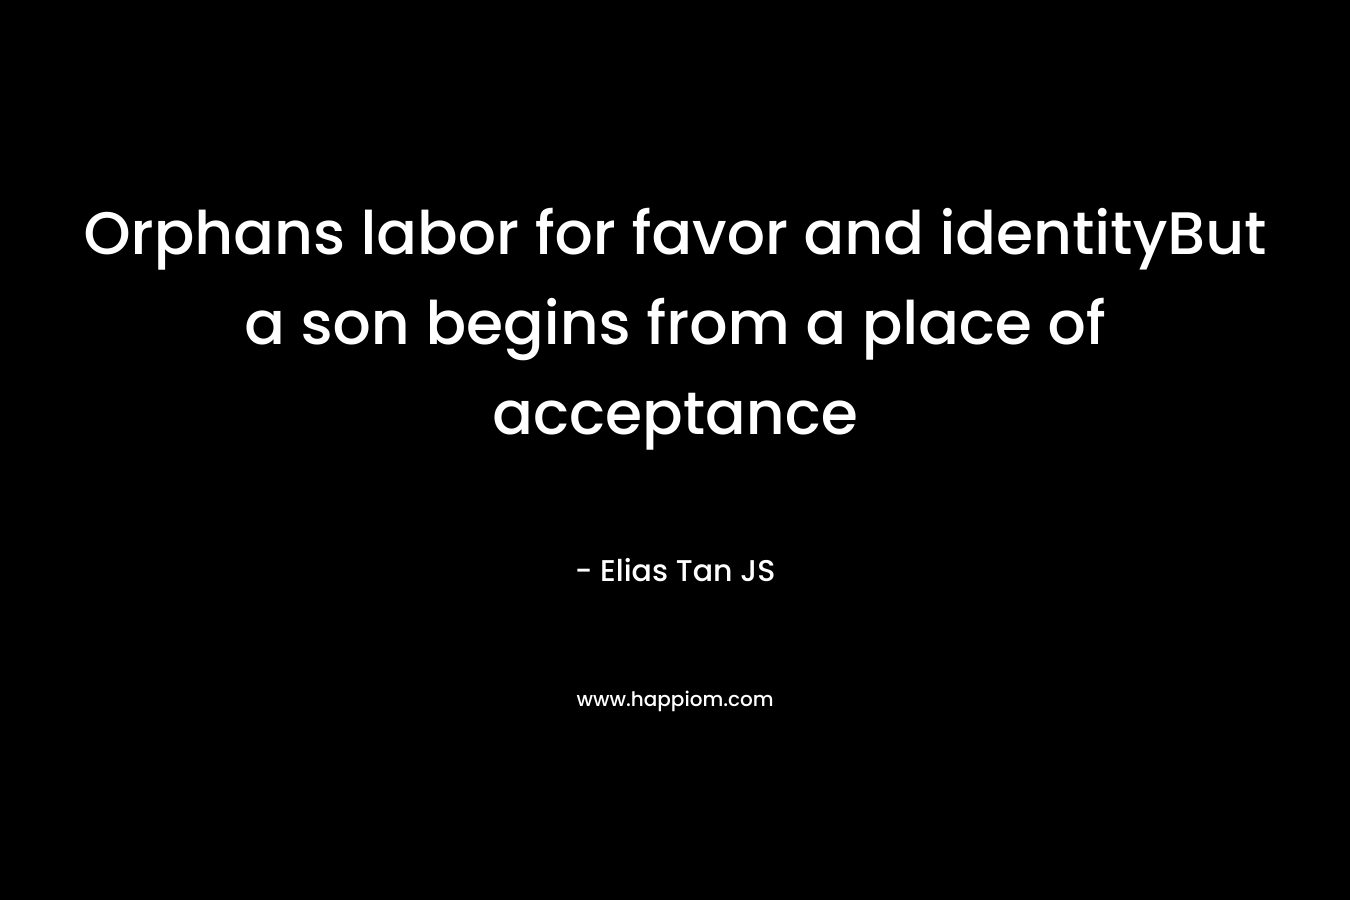 Orphans labor for favor and identityBut a son begins from a place of acceptance – Elias Tan JS